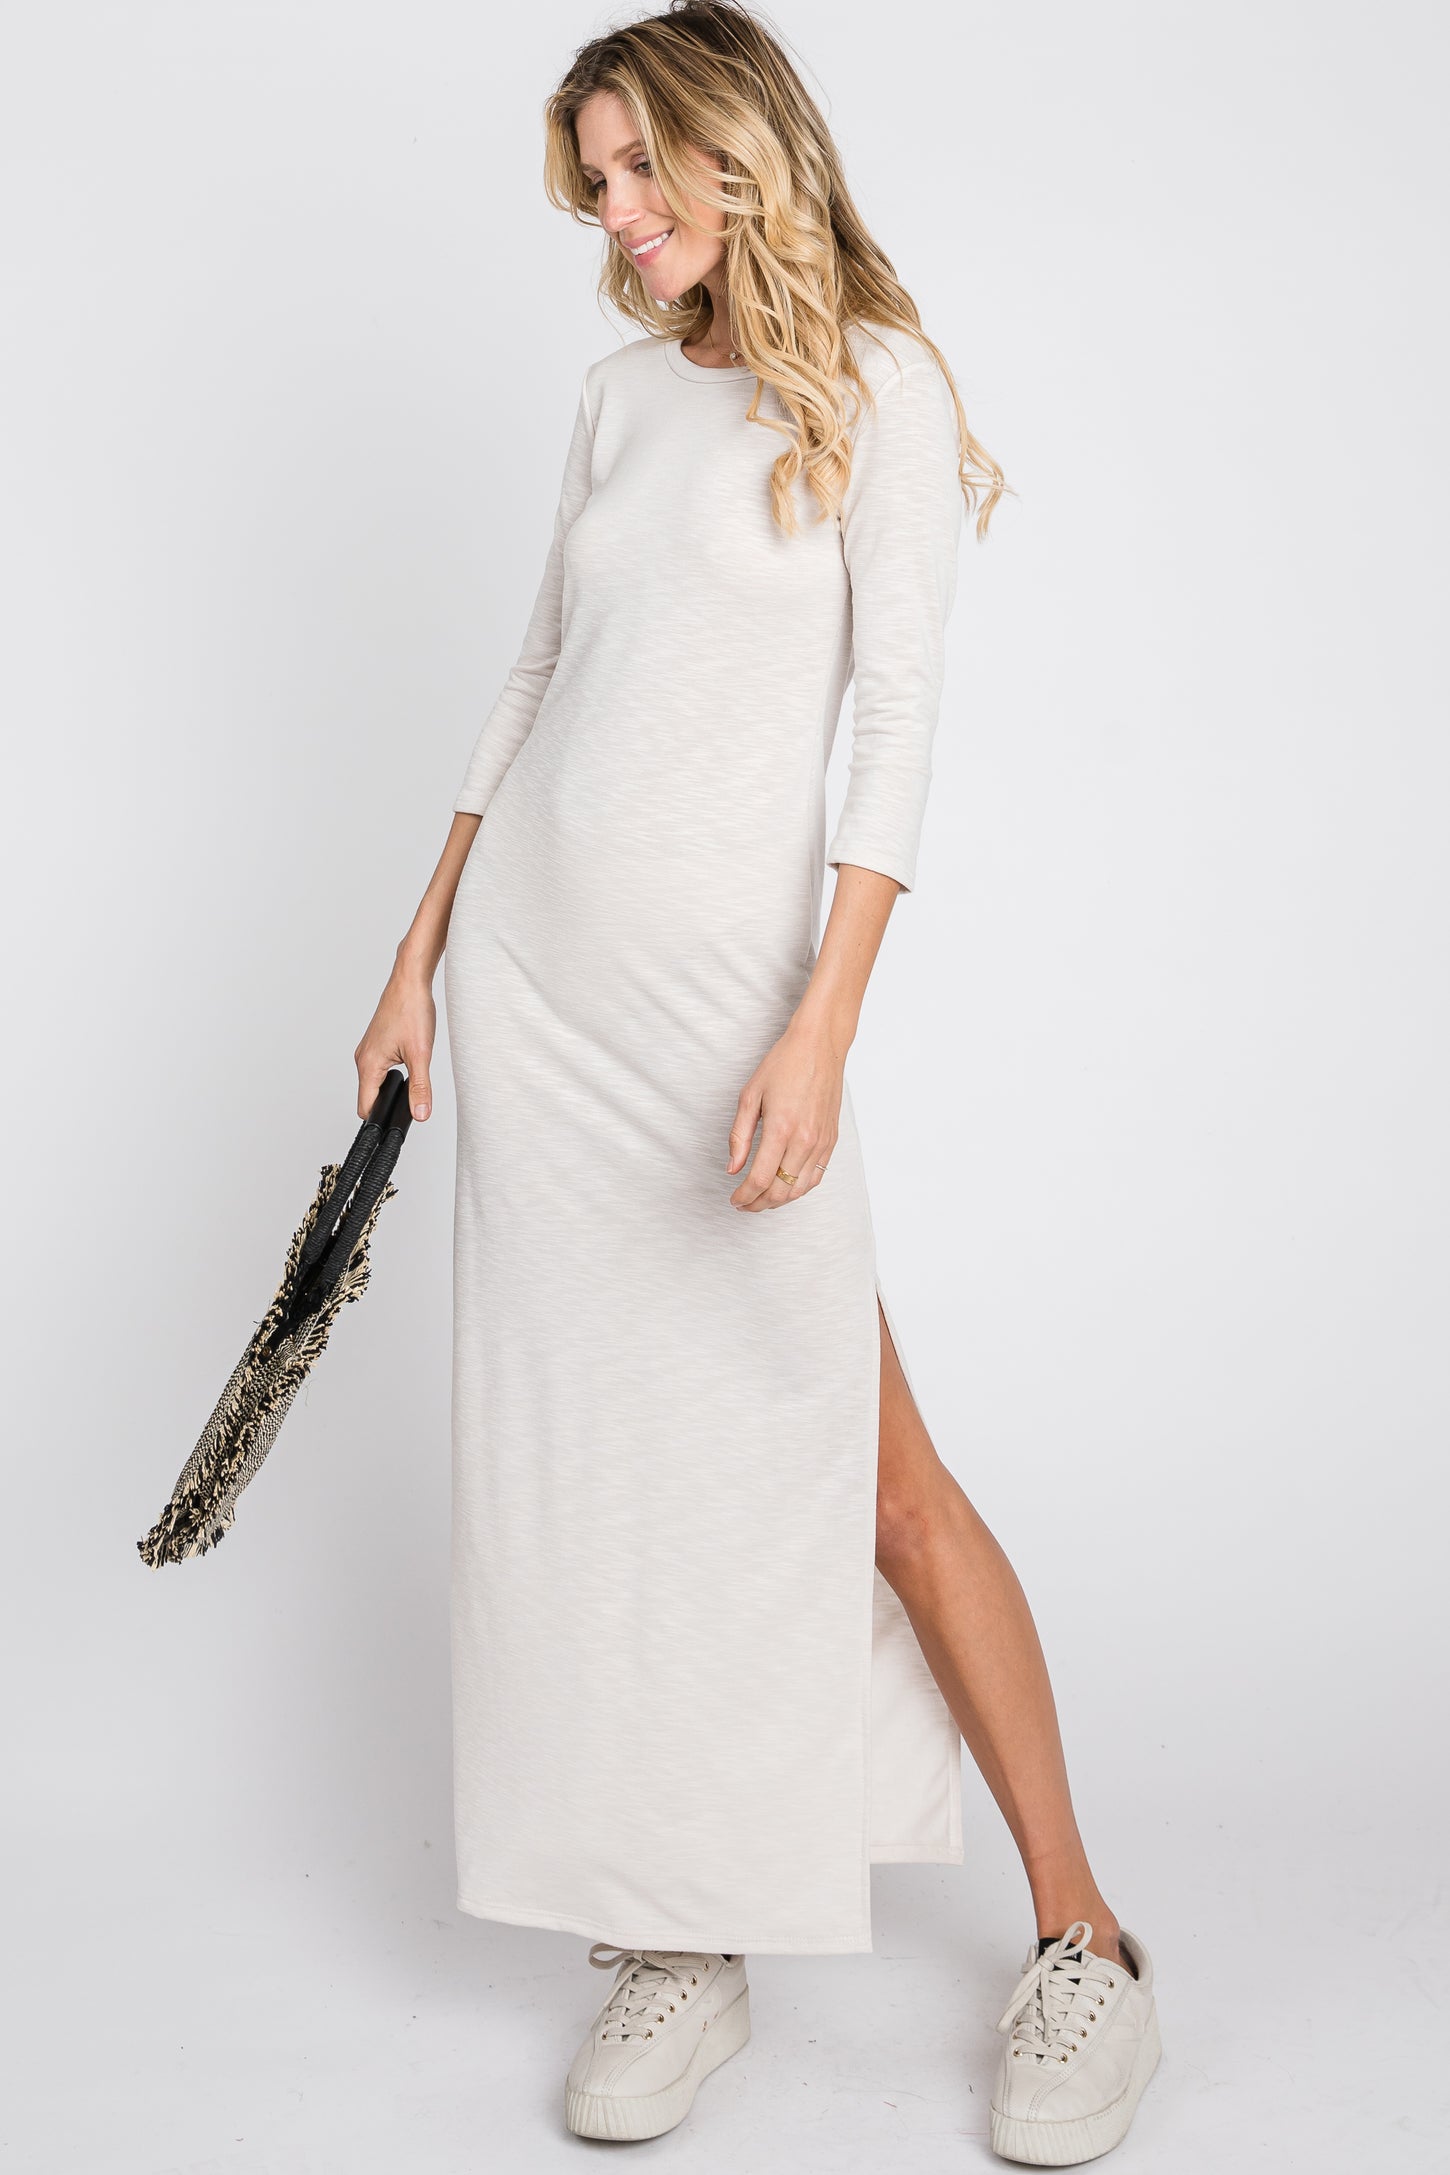 Ivory French Terry Side Slit Maternity Maxi Dress